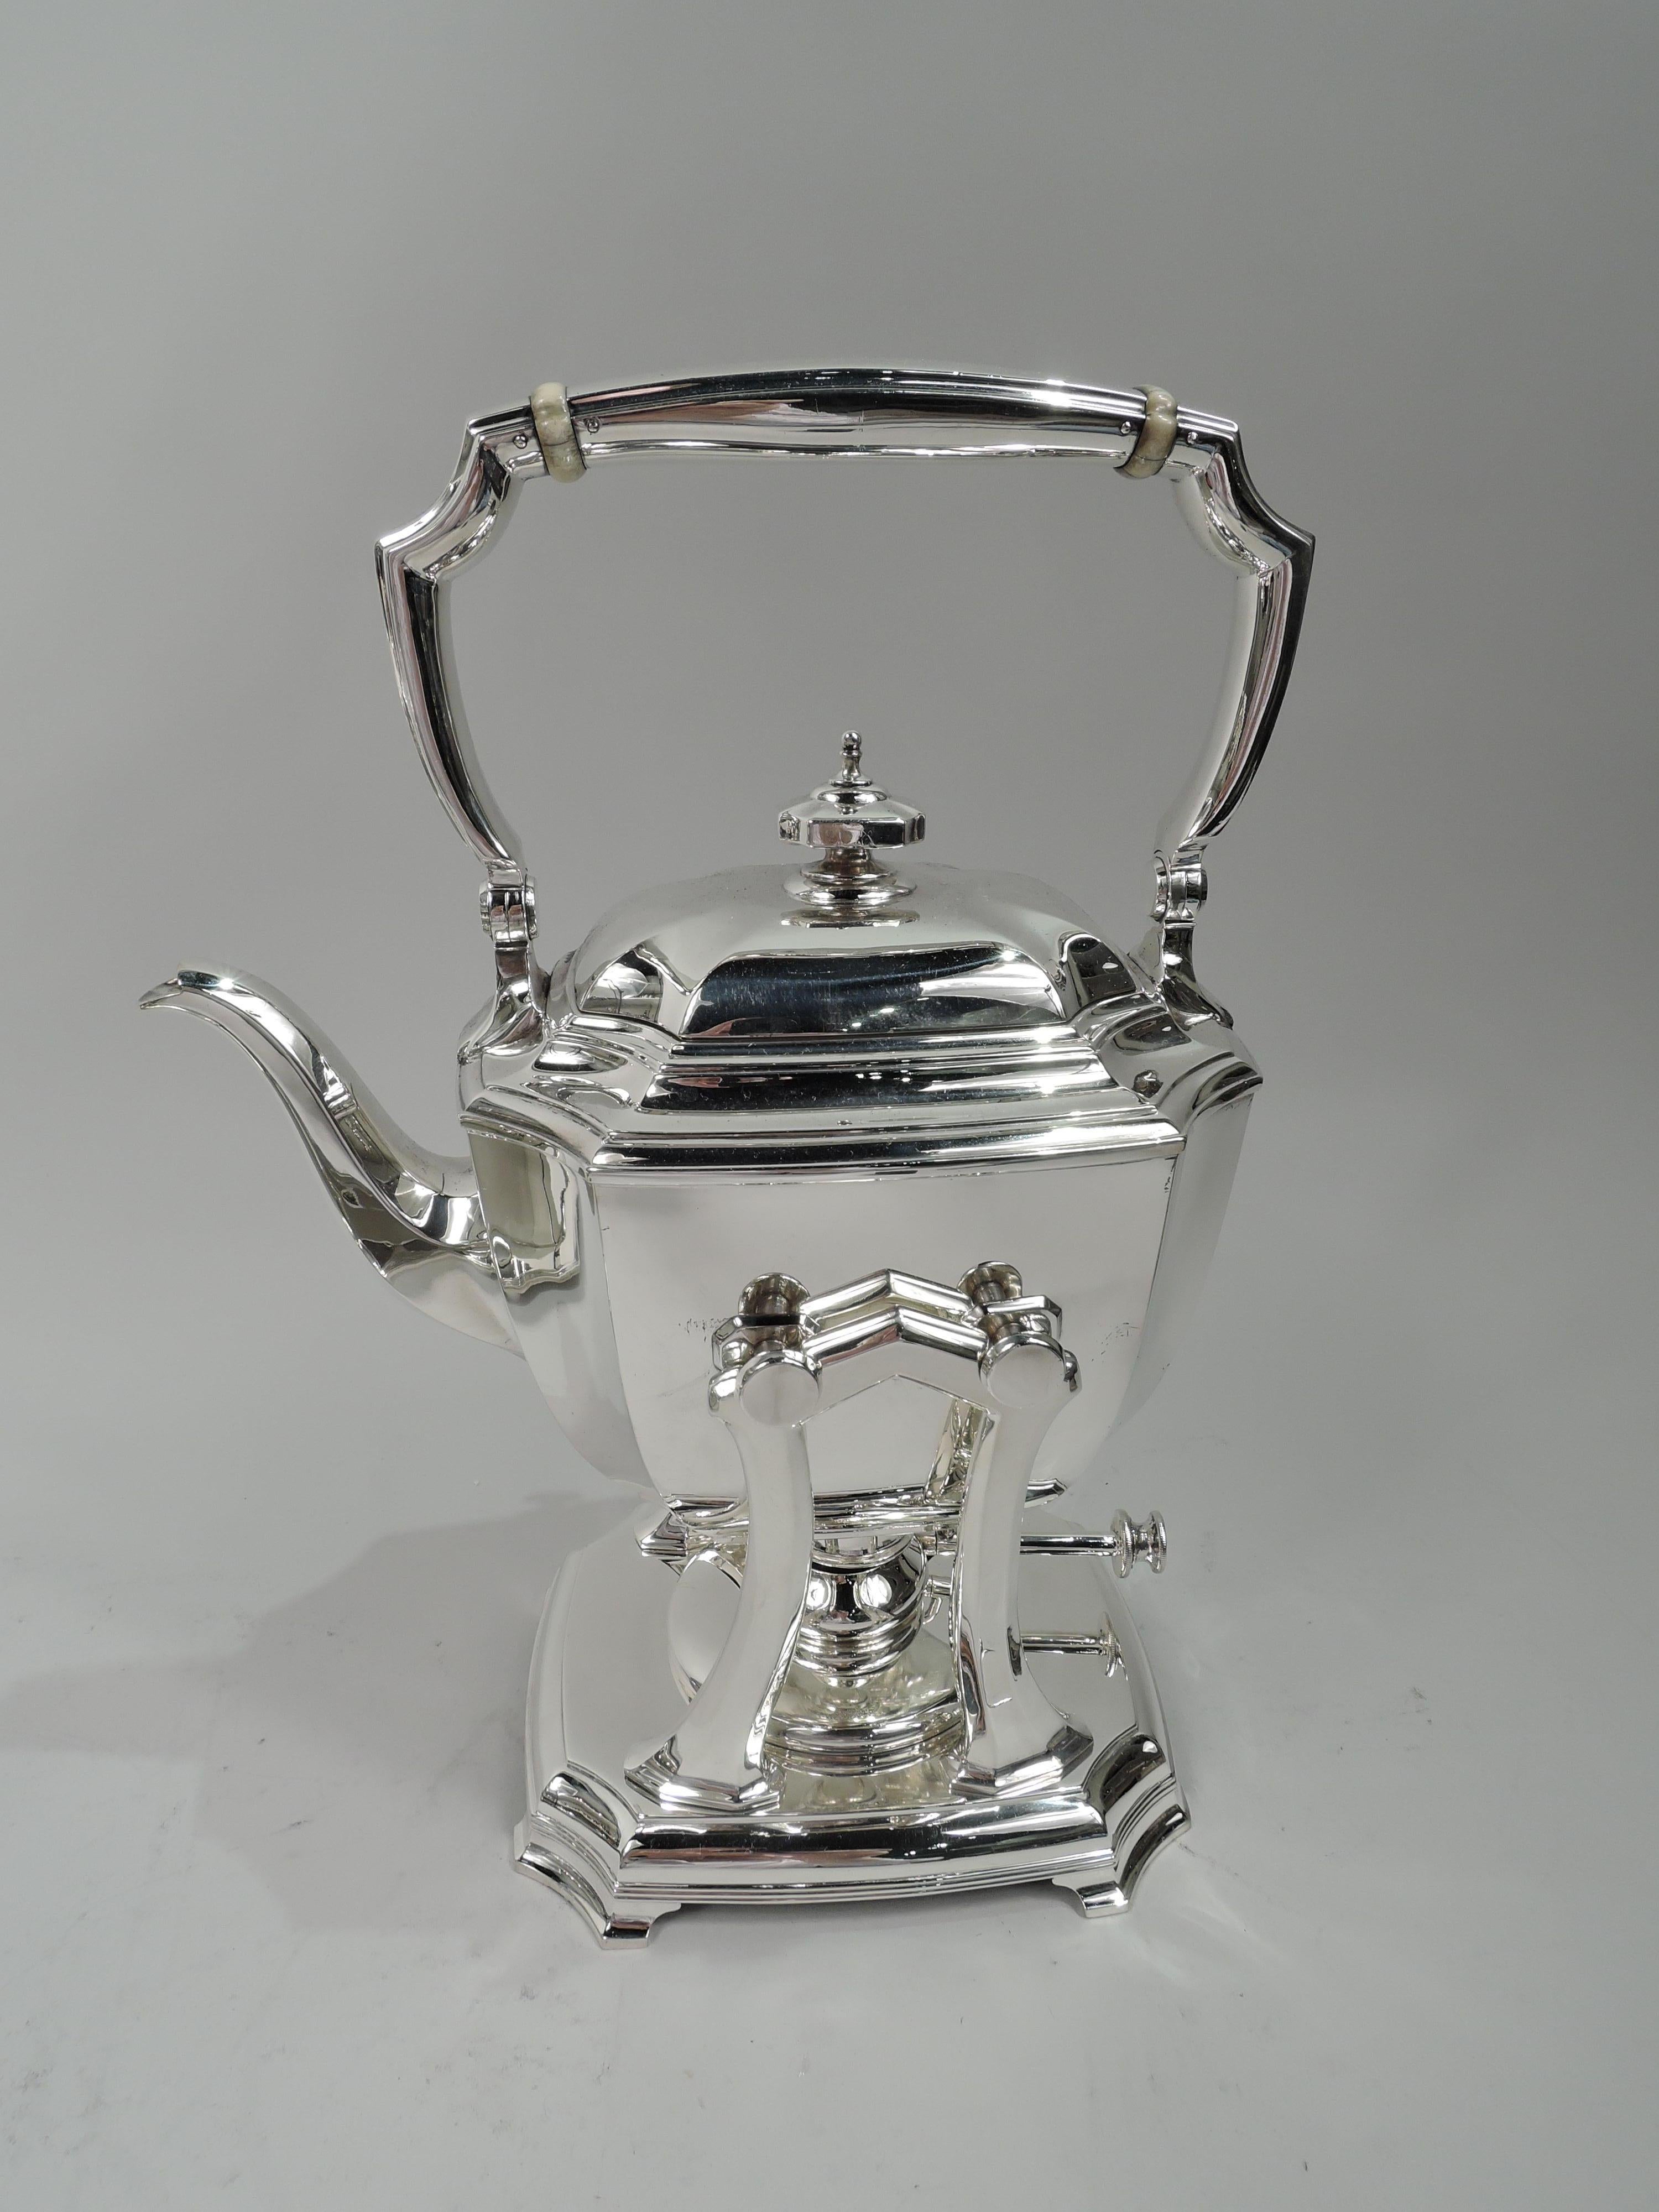 Hampton sterling silver coffee and tea set on tray. Made by Tiffany & Co. in New York. This set comprises 7 pieces: Hot water kettle on stand, coffeepot, teapot, creamer, sugar, and waste bowl on tray. Rectilinear with gently curved sides and